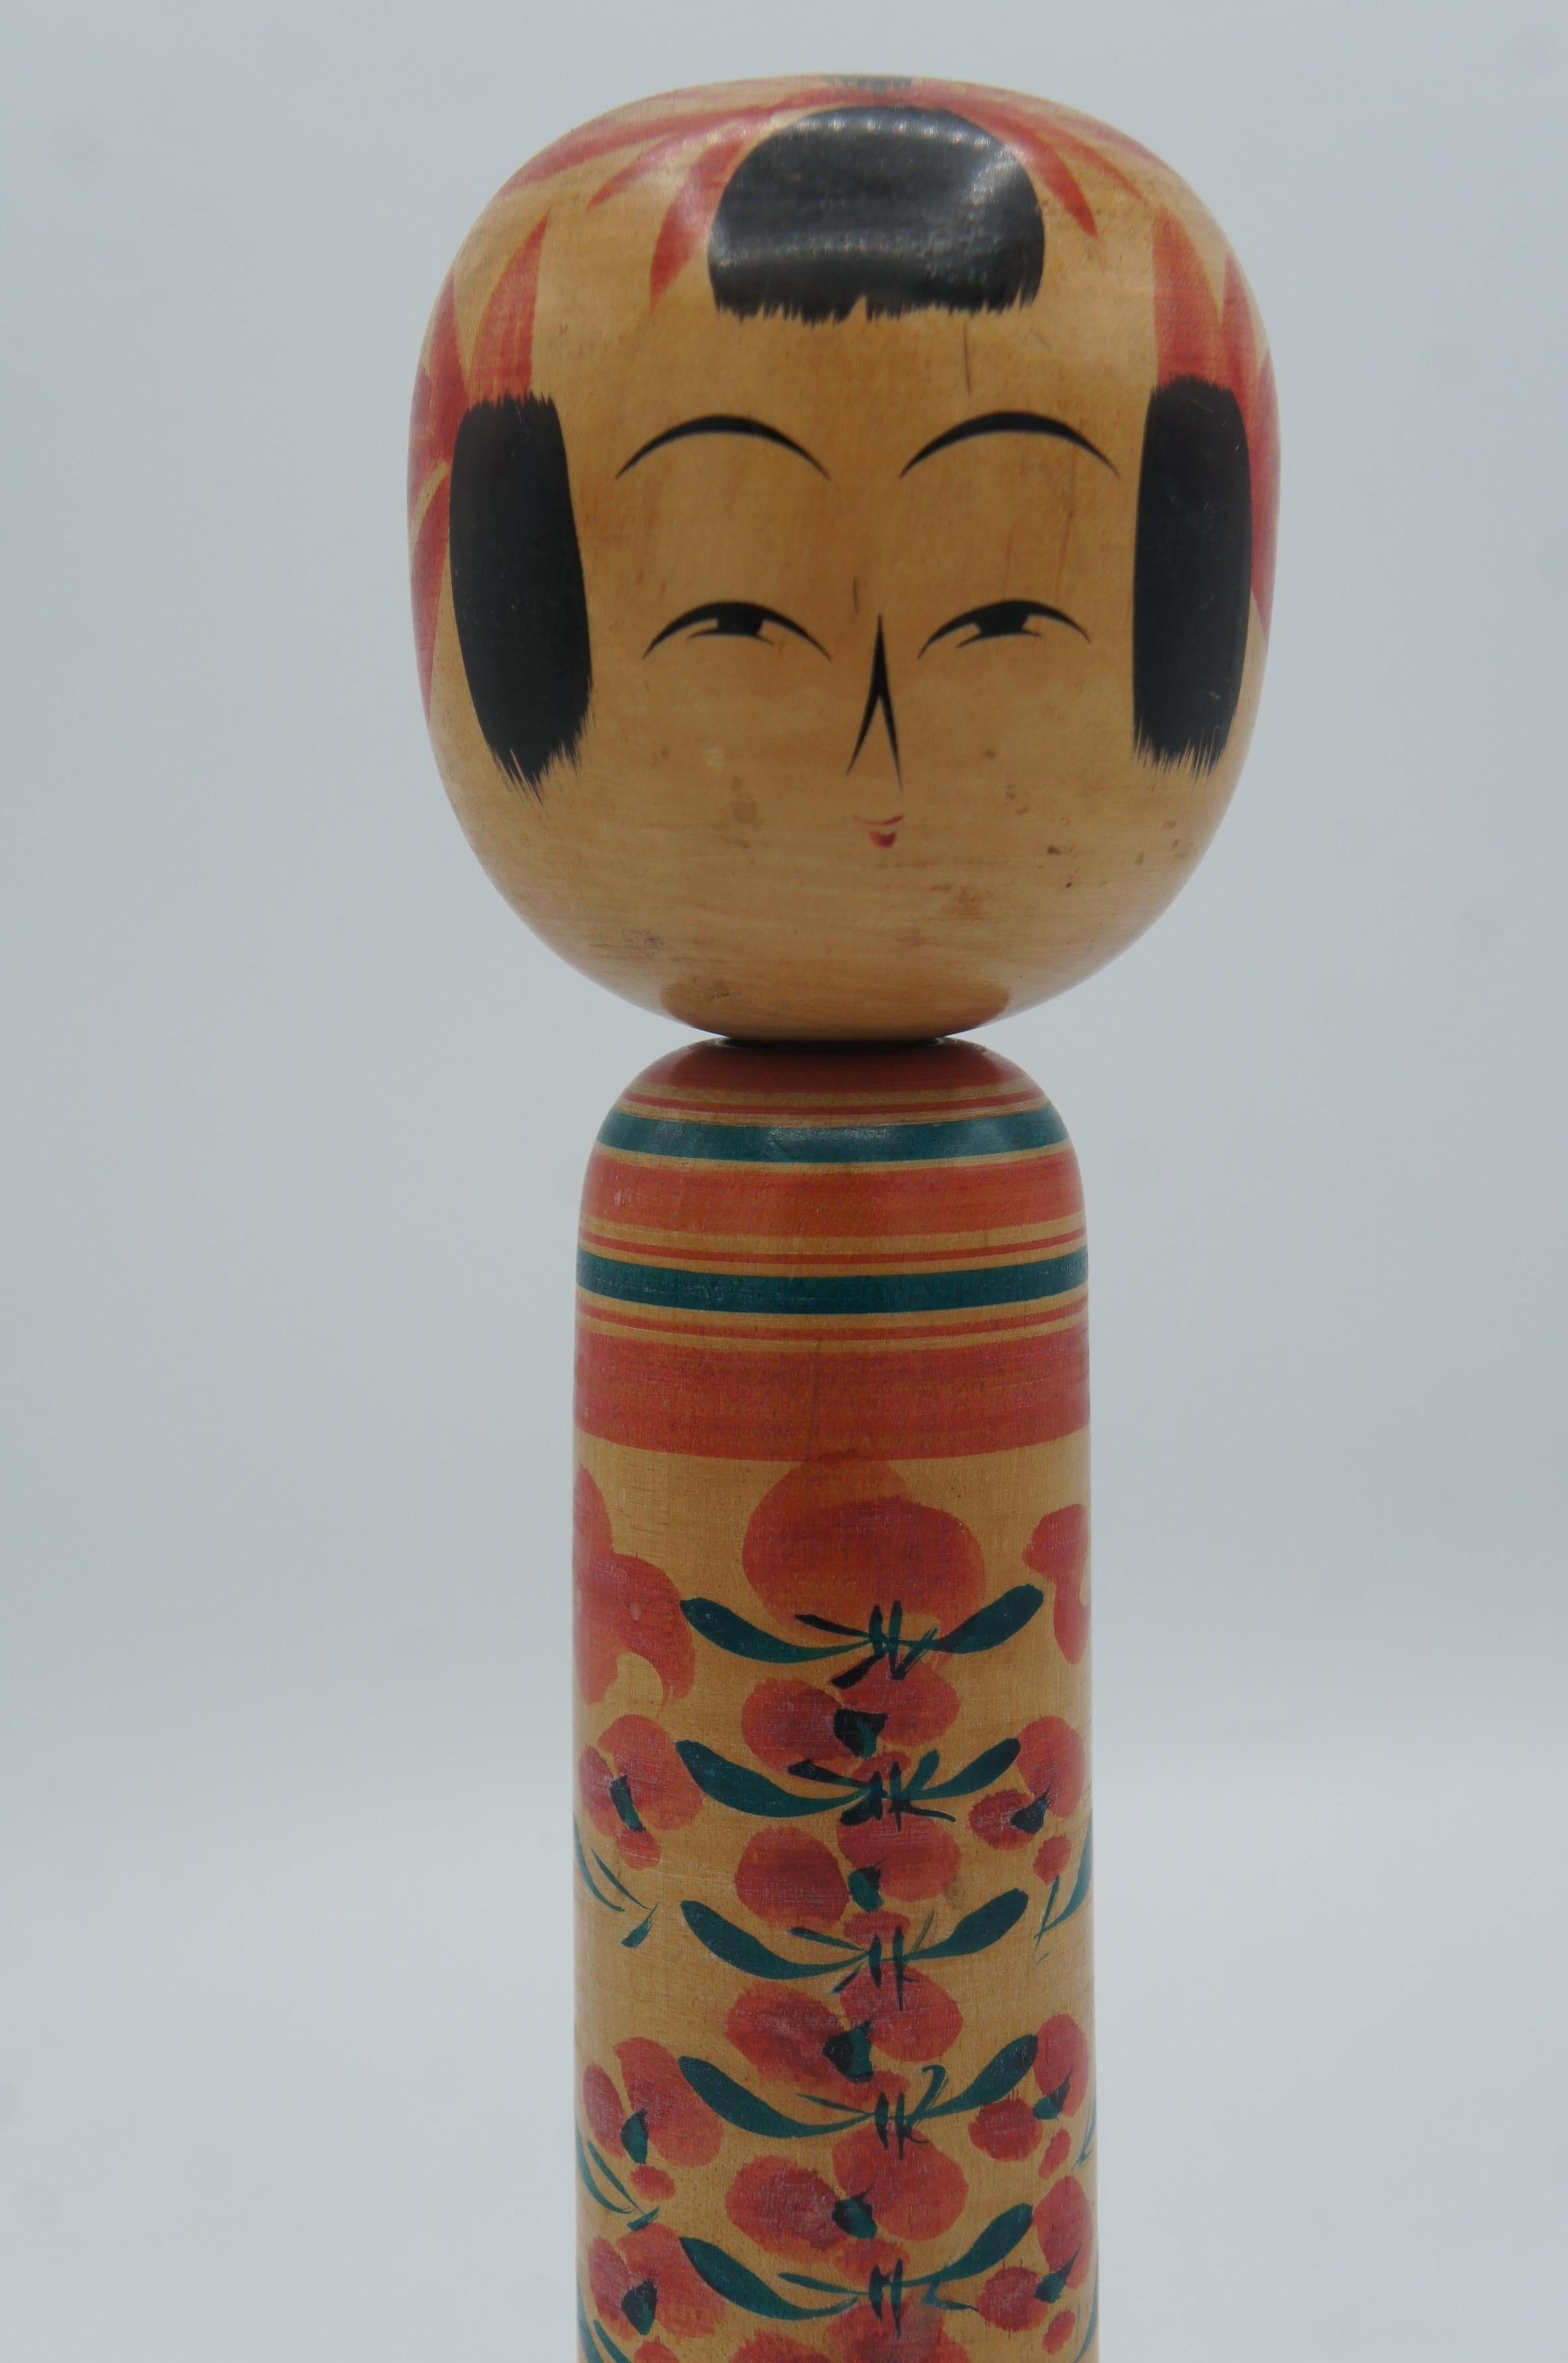 This is a wooden doll which is called Kokeshi in Japanese.
This kokeshi was made in Japan around 1970s by kokeshi artist Chujiro KOBAYASHI.
He was born in Yamagata prefecture in 13th March 1932. His signature is written on the bottom of this kokeshi